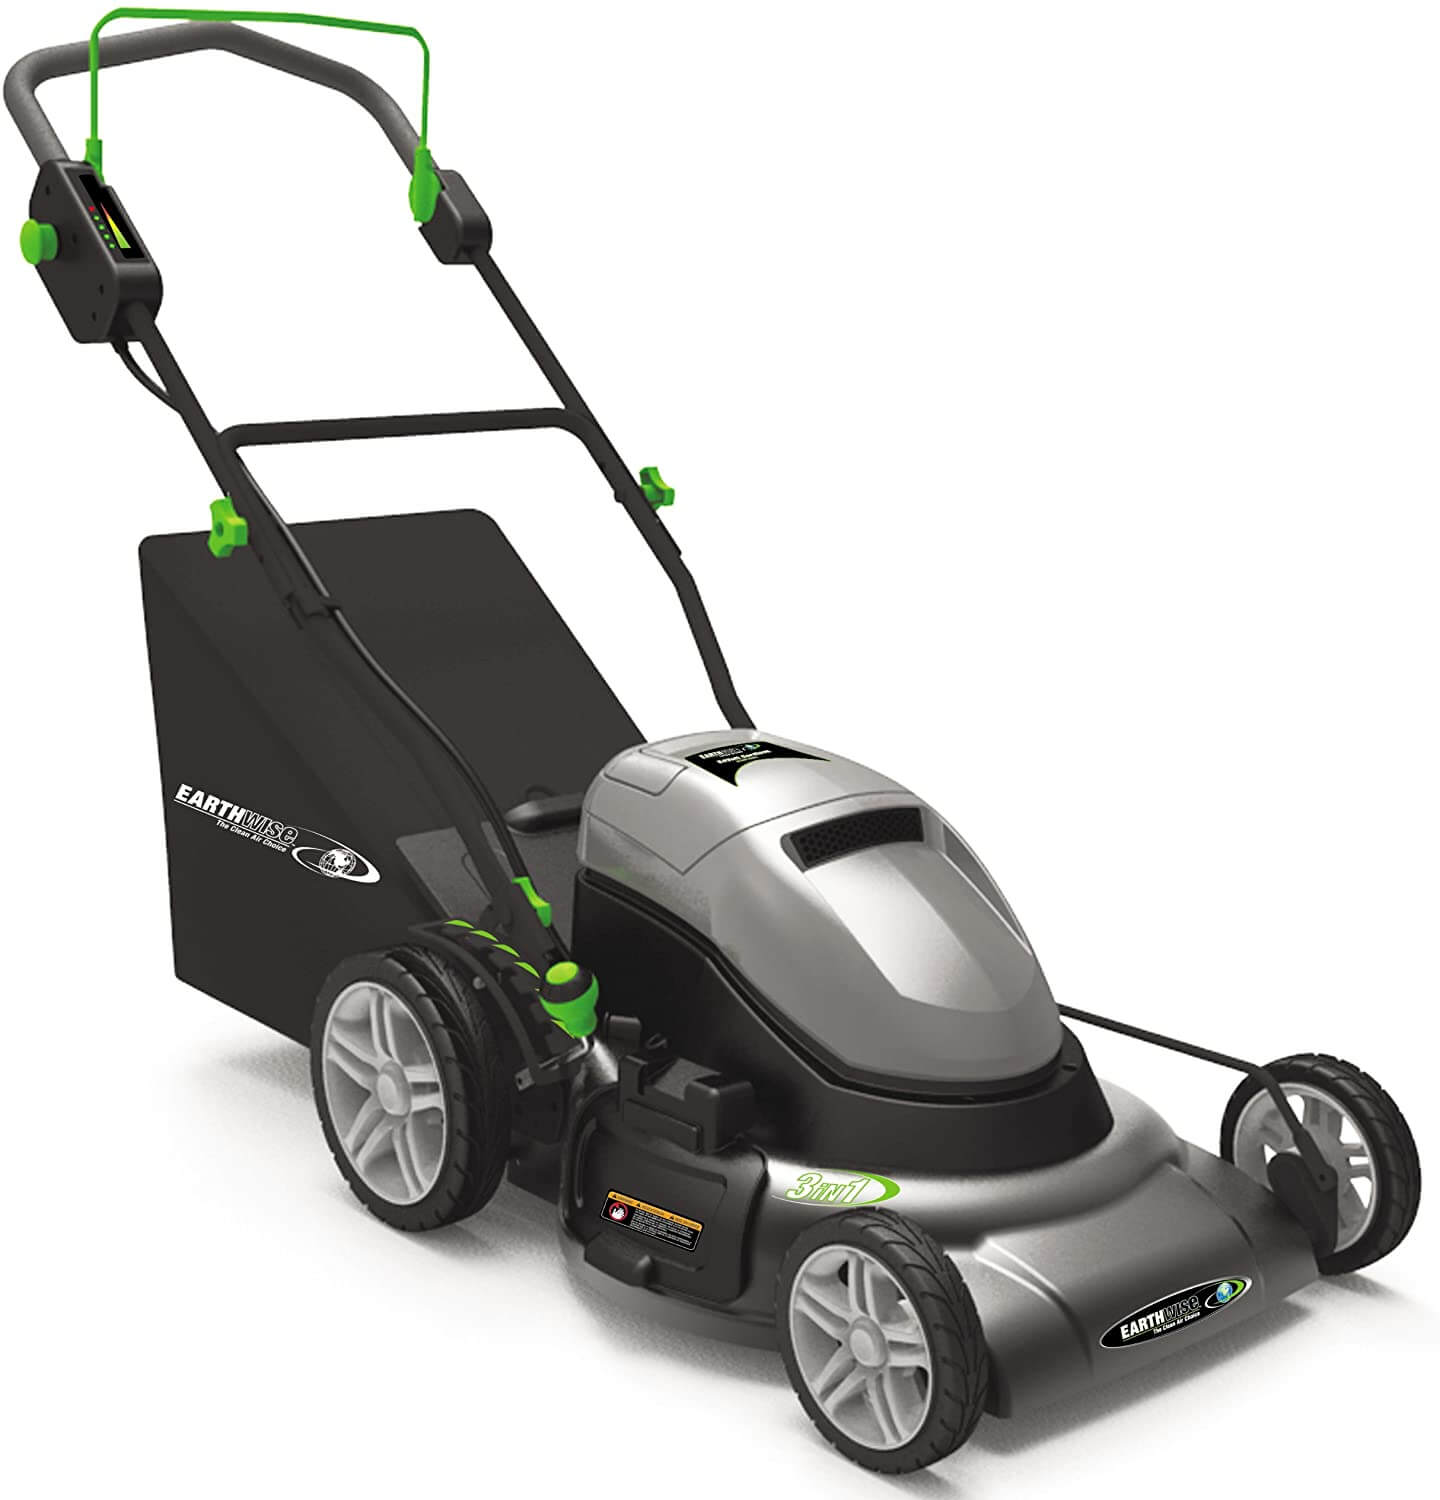 Earthwise 60220 Cordless Electric Mower